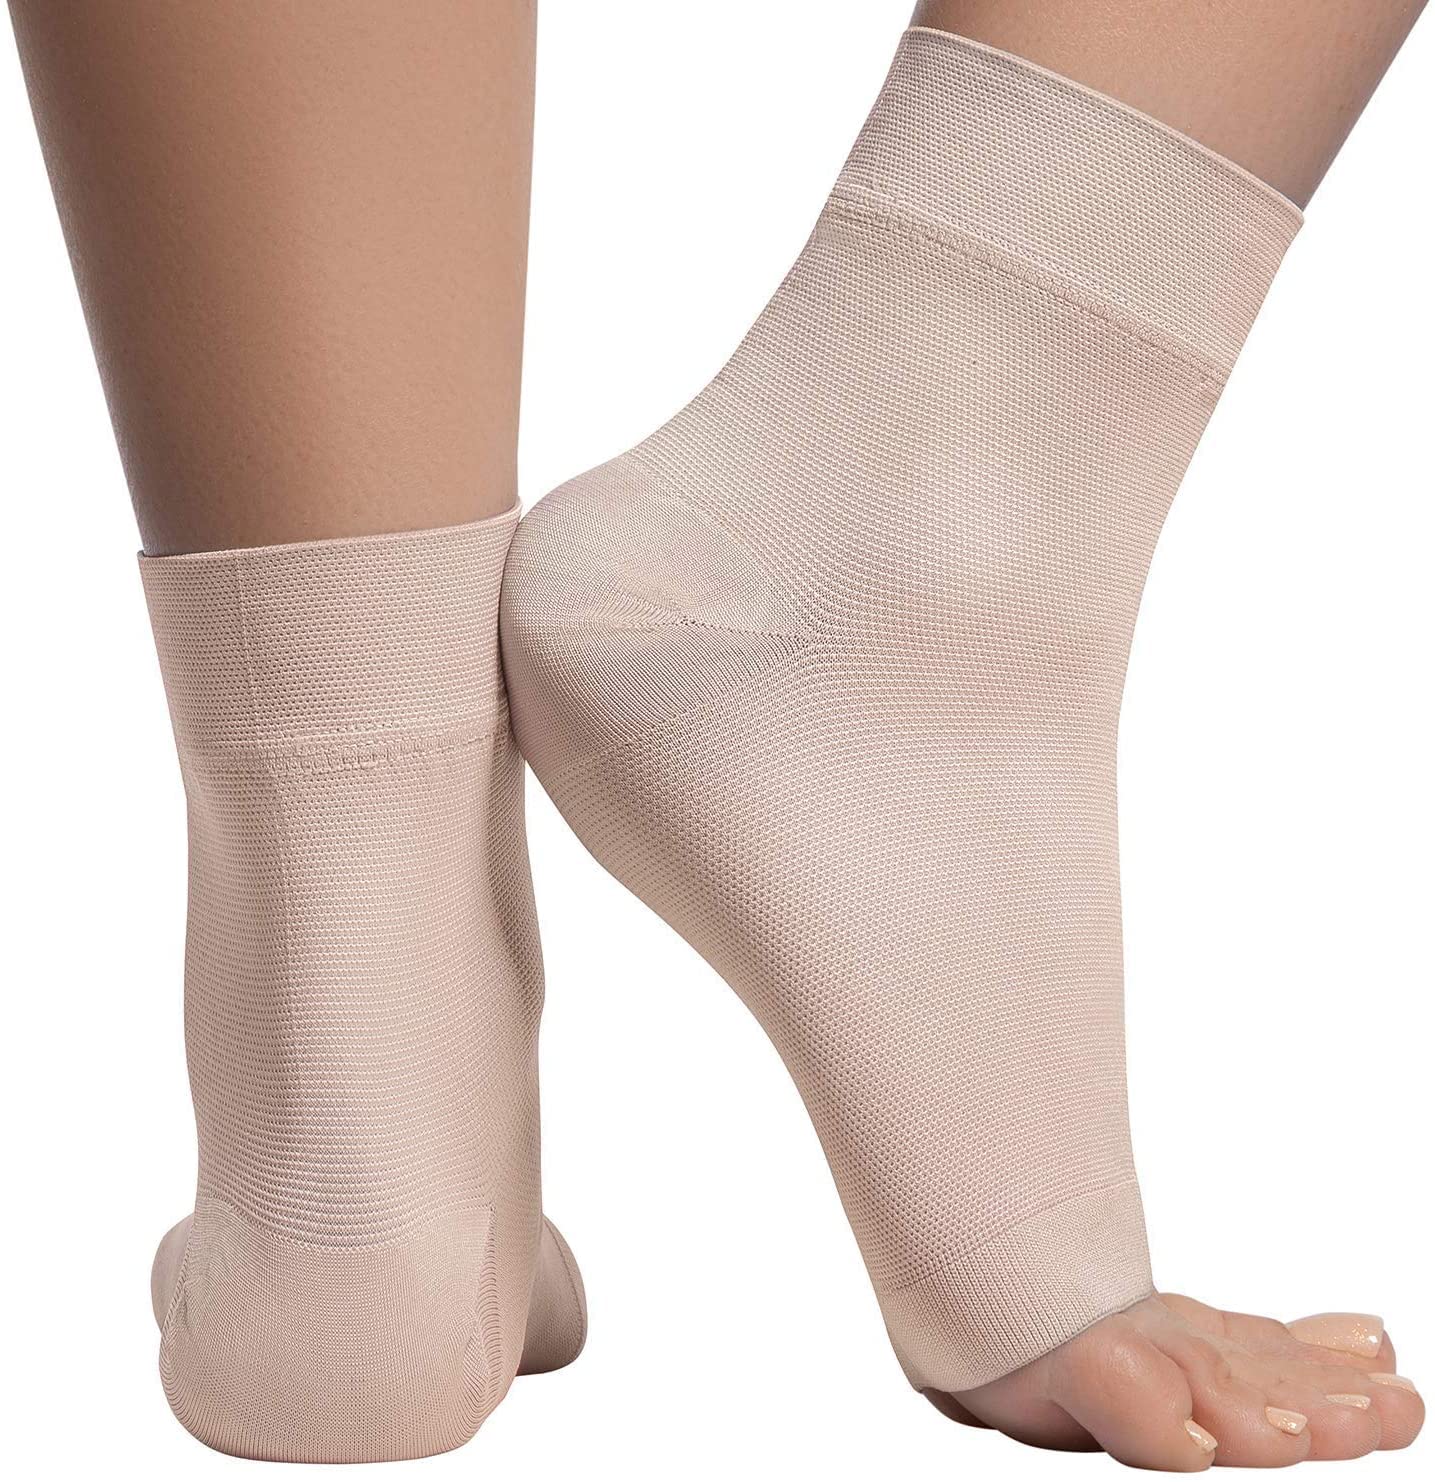 Ankle Compression Sleeve - 20-30mmhg Open Toe ompression Socks for